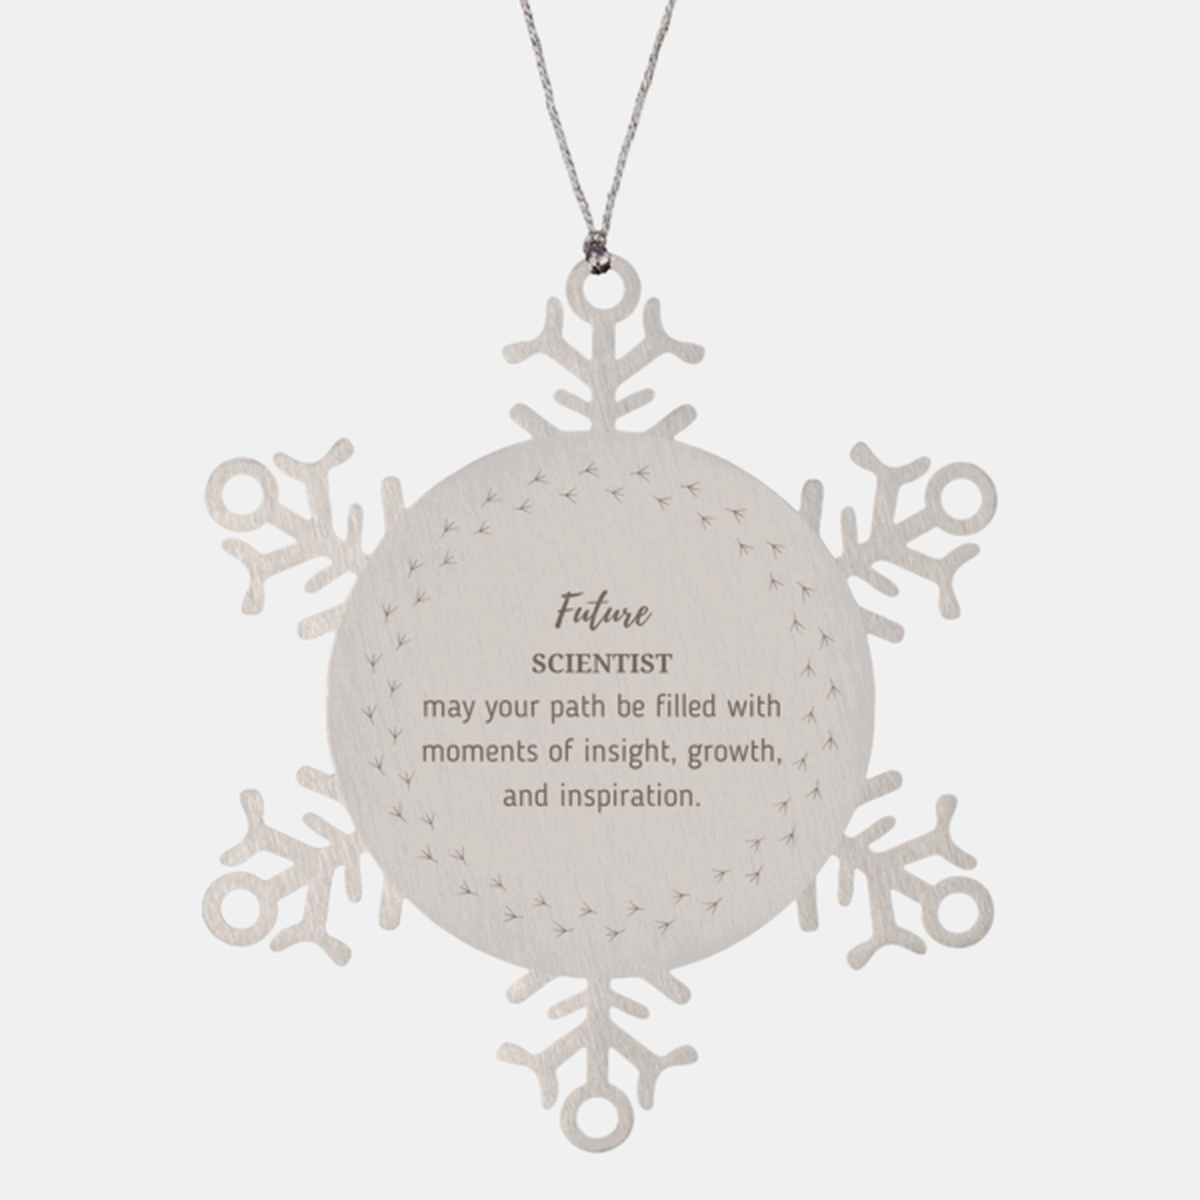 Future Scientist Gifts, May your path be filled with moments of insight, Graduation Gifts for New Scientist, Christmas Unique Snowflake Ornament For Men, Women, Friends